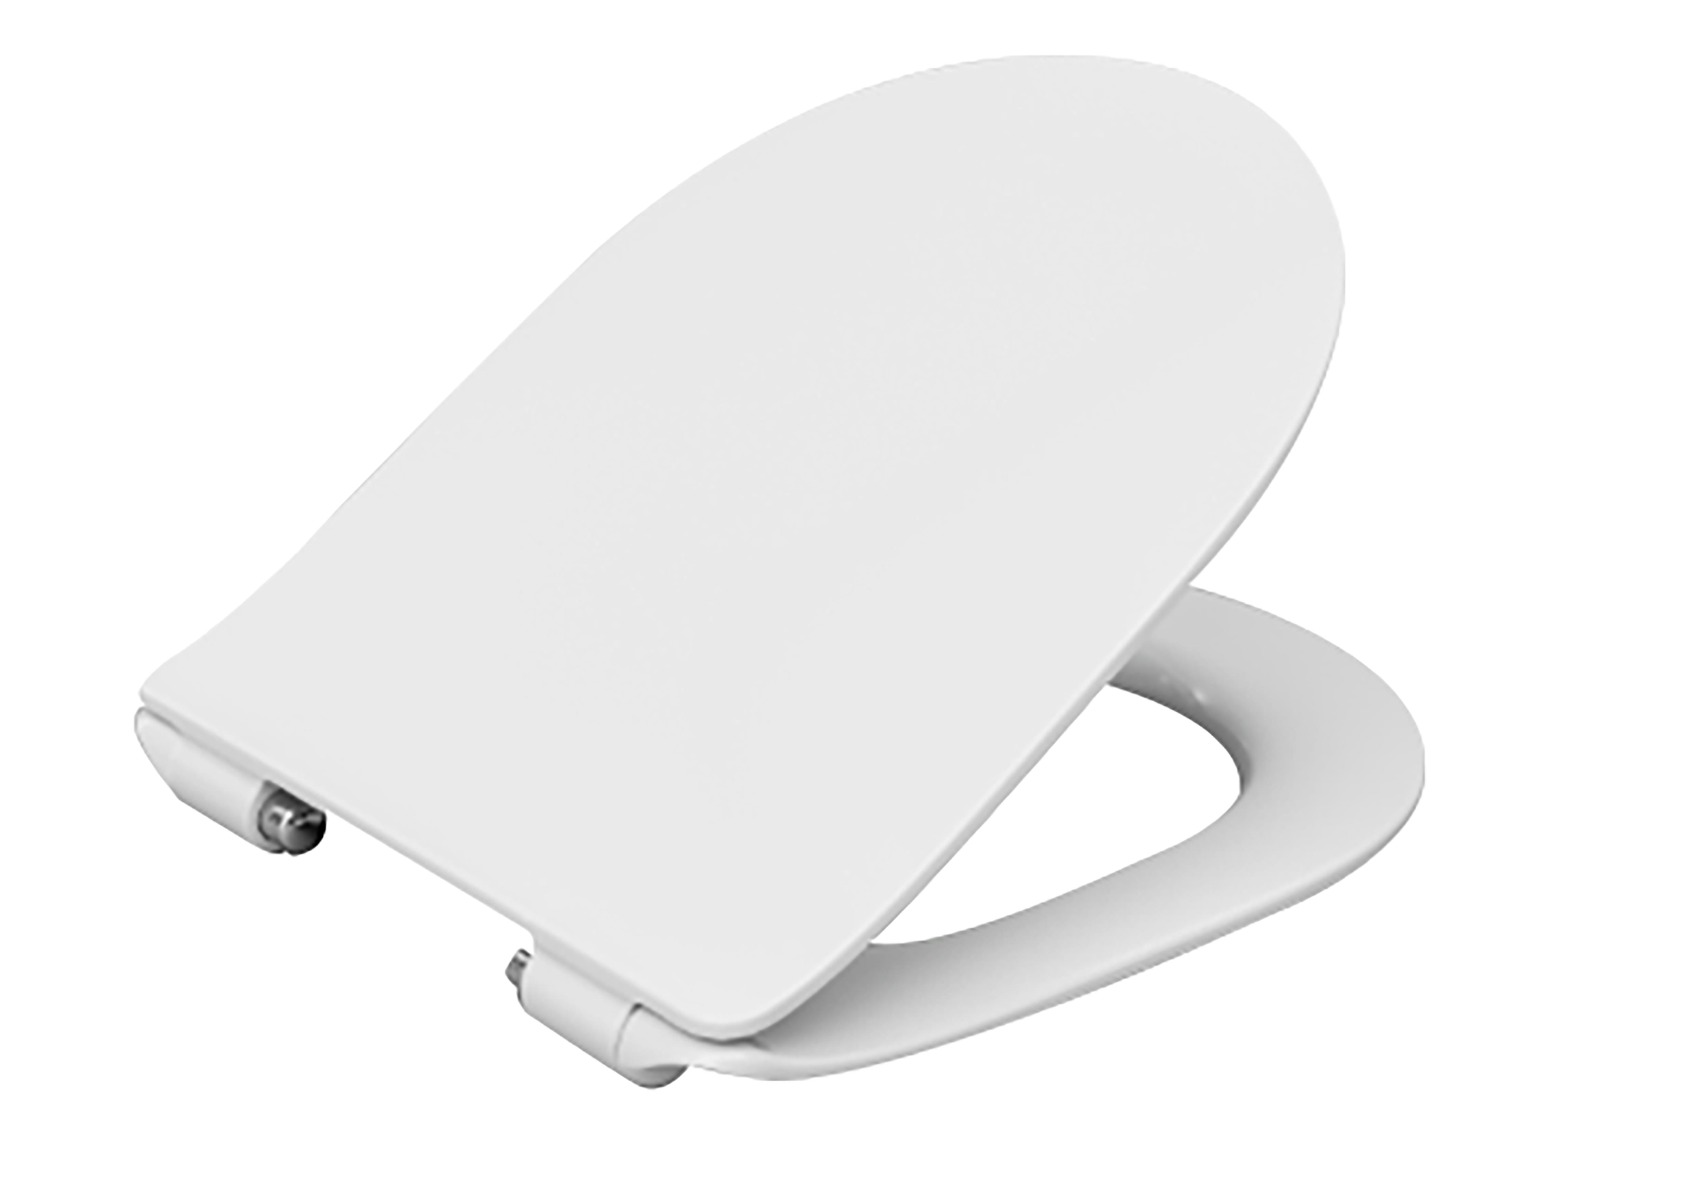 Z80164C004 Slim soft-closing toilet seat and cover